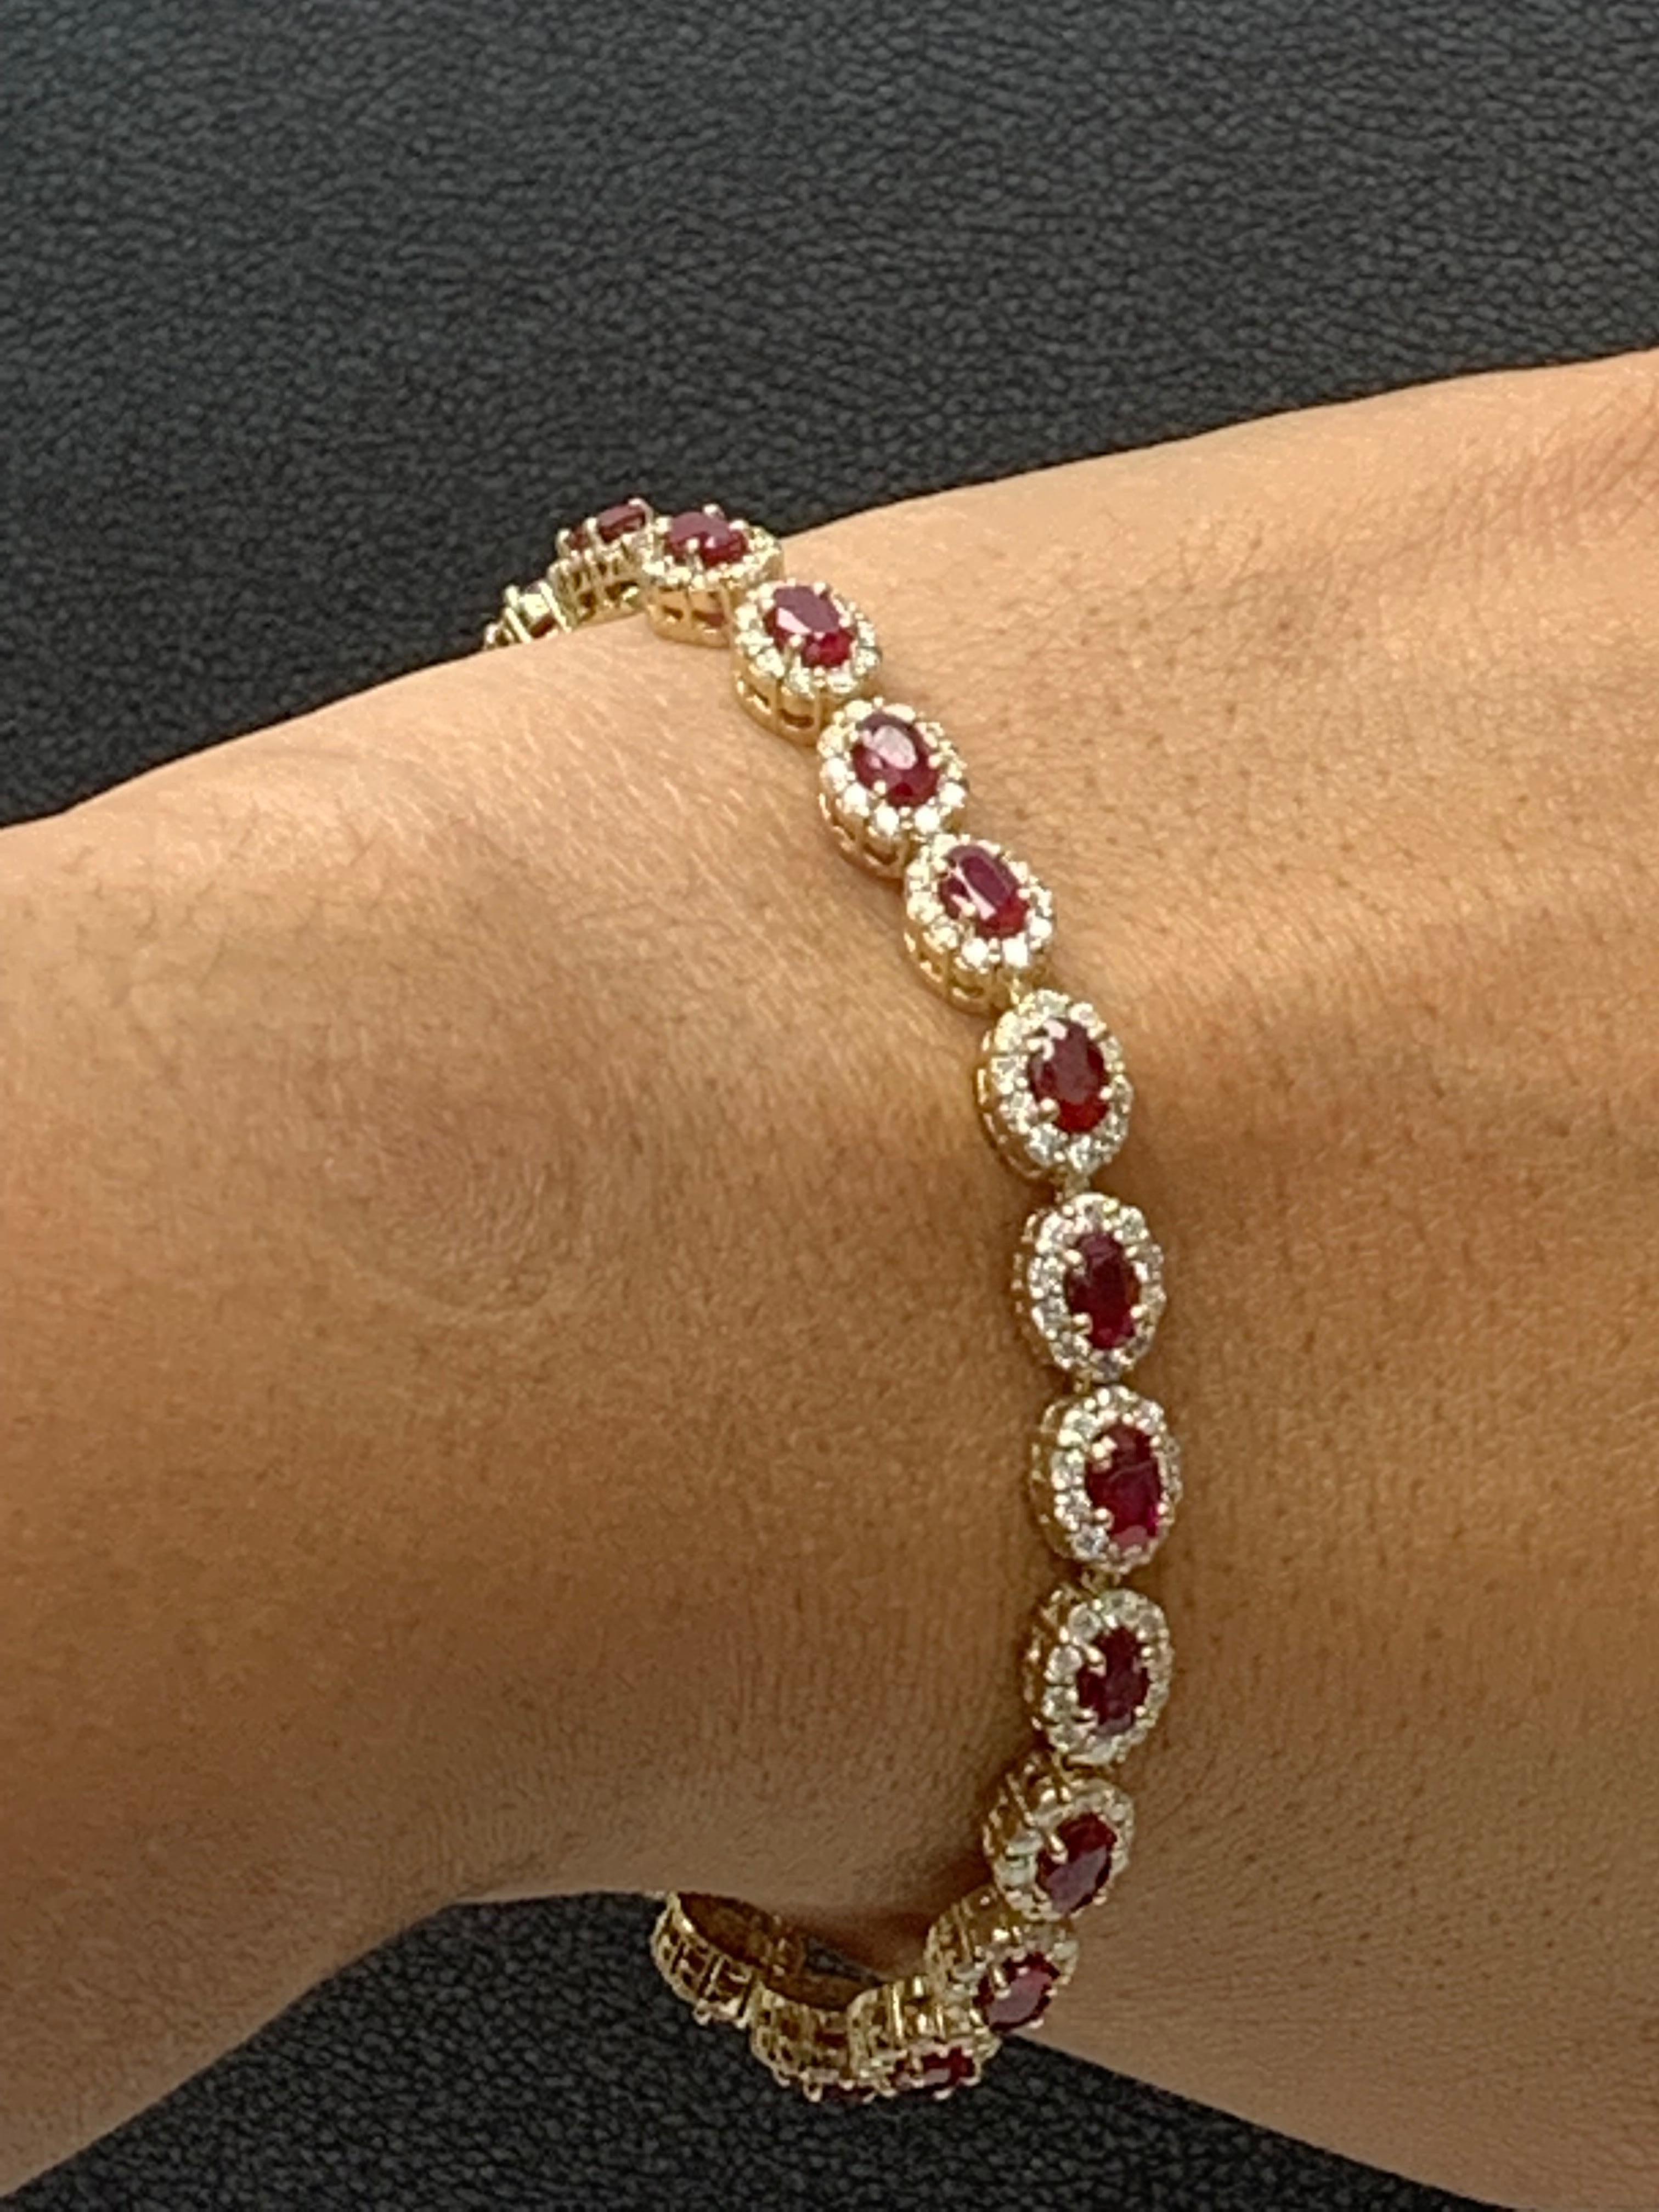 6.43 Carat Oval Cut Ruby and Diamond Halo Bracelet in 14K Yellow Gold For Sale 6